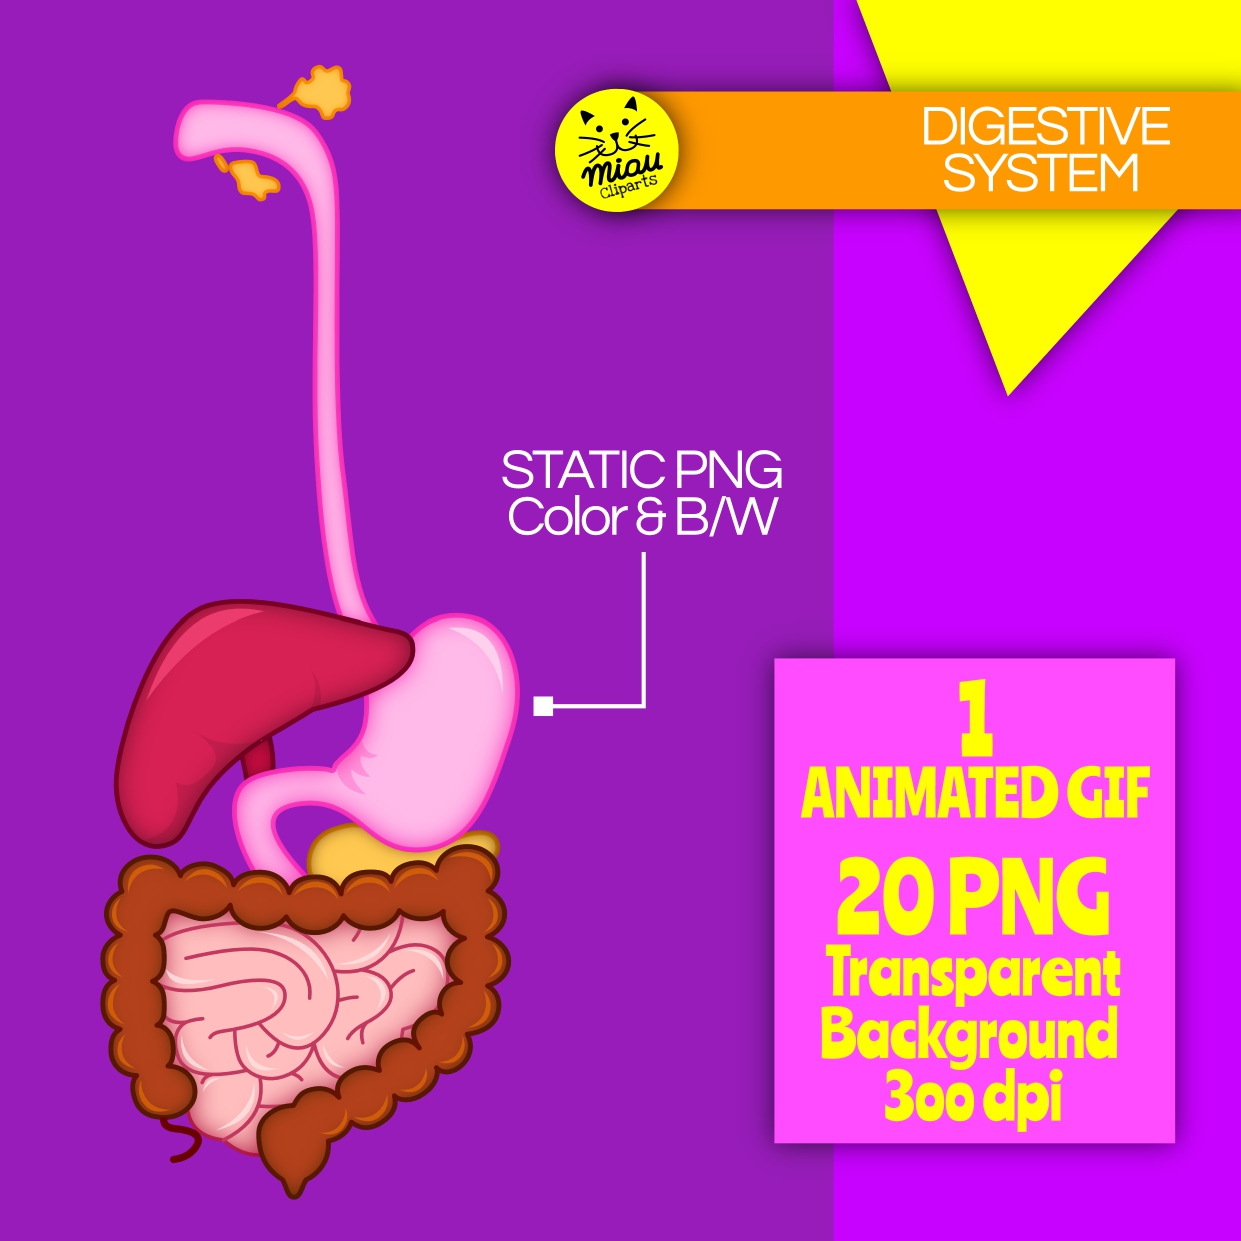 Human Anatomy. Gastrointestinal Tract Or Digestive System. Royalty ...